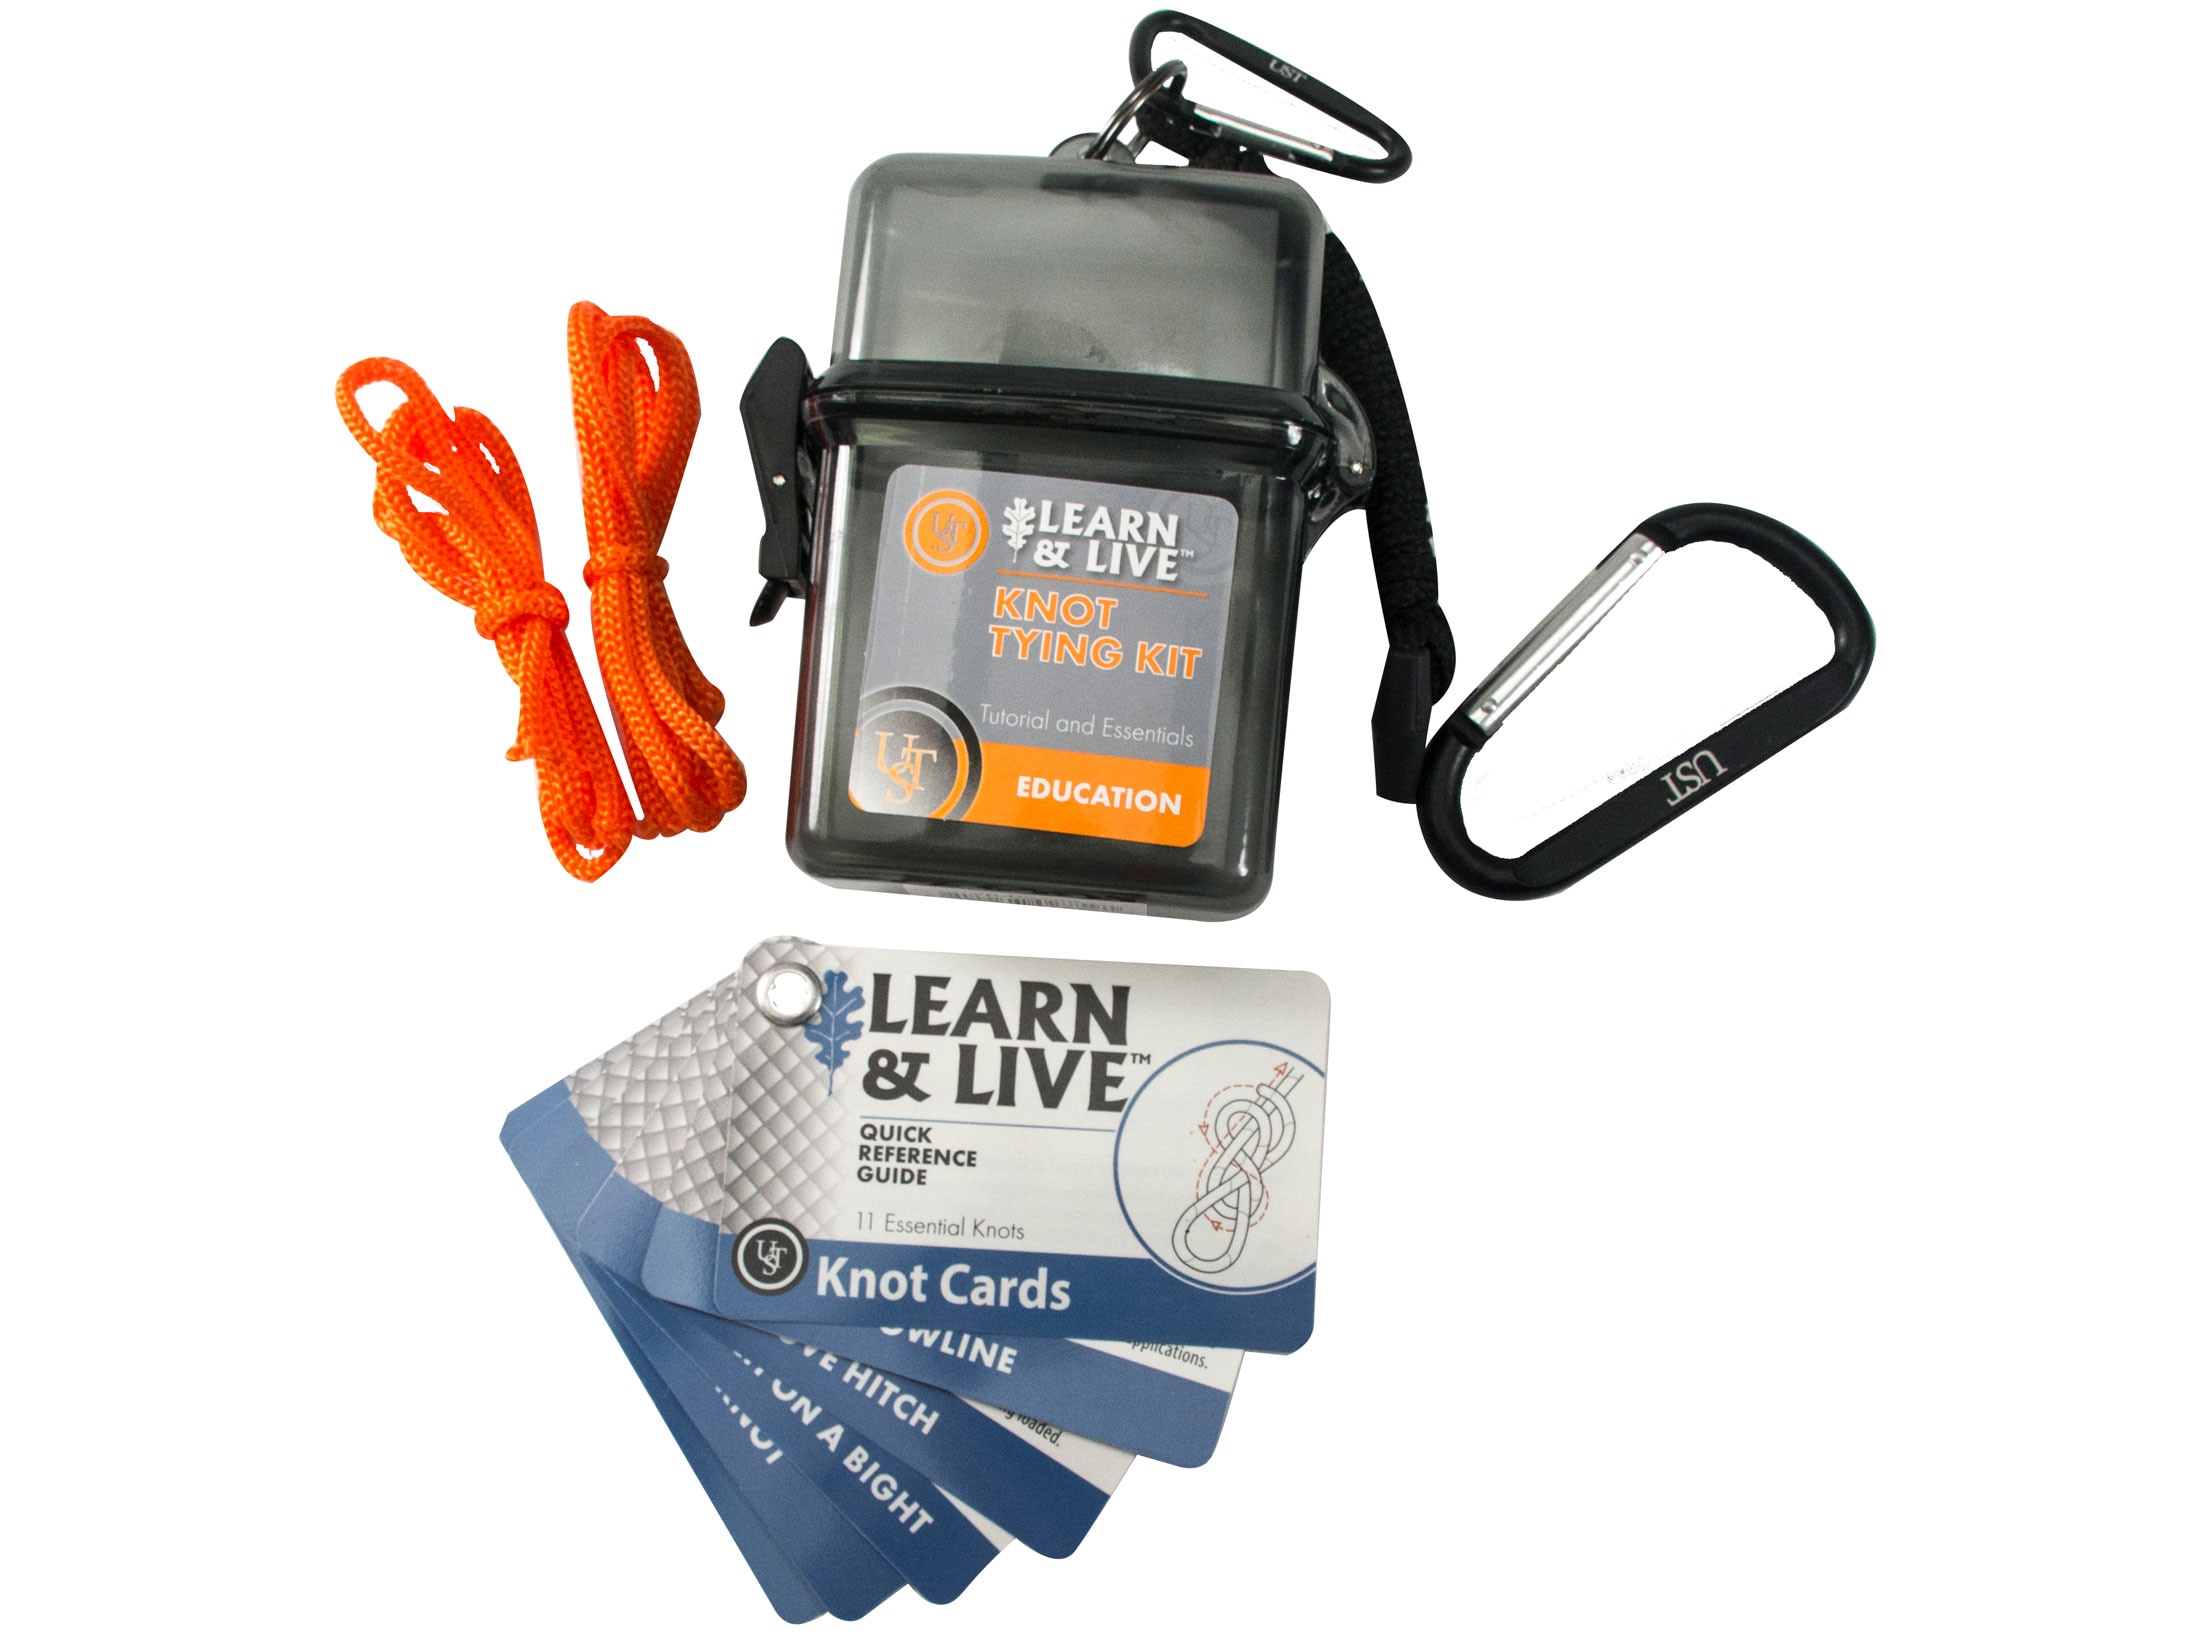 UST Learn & Live Survival Kit Knot Tying